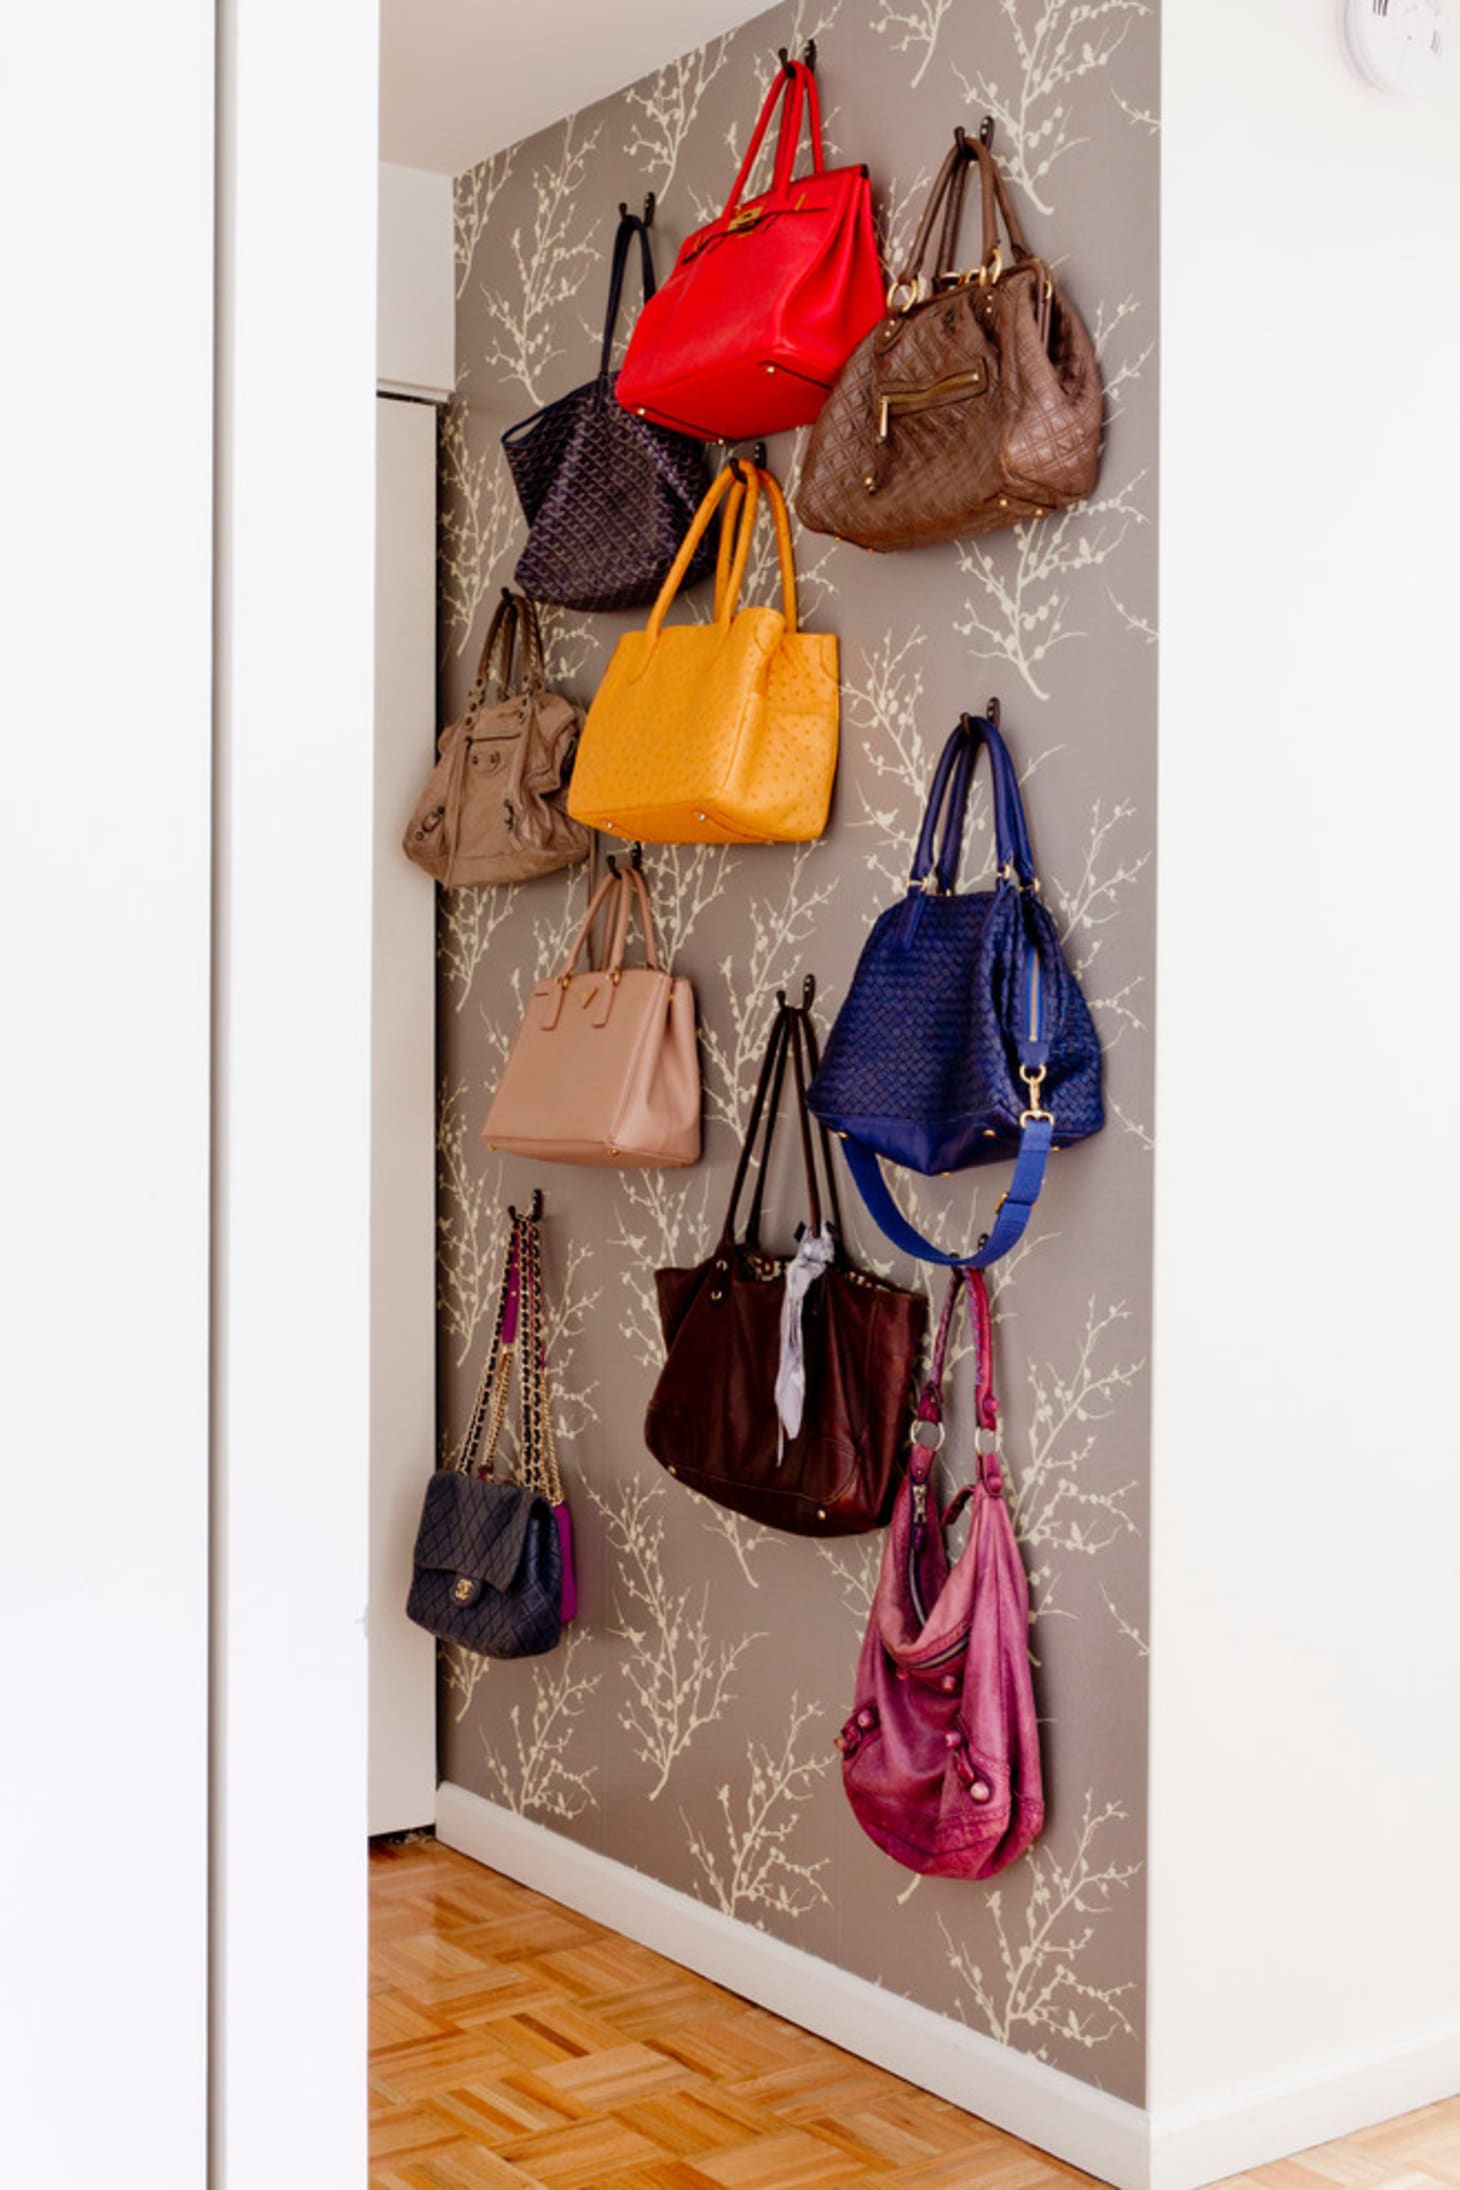 Purse Storage Options to Buy or DIY | Apartment Therapy